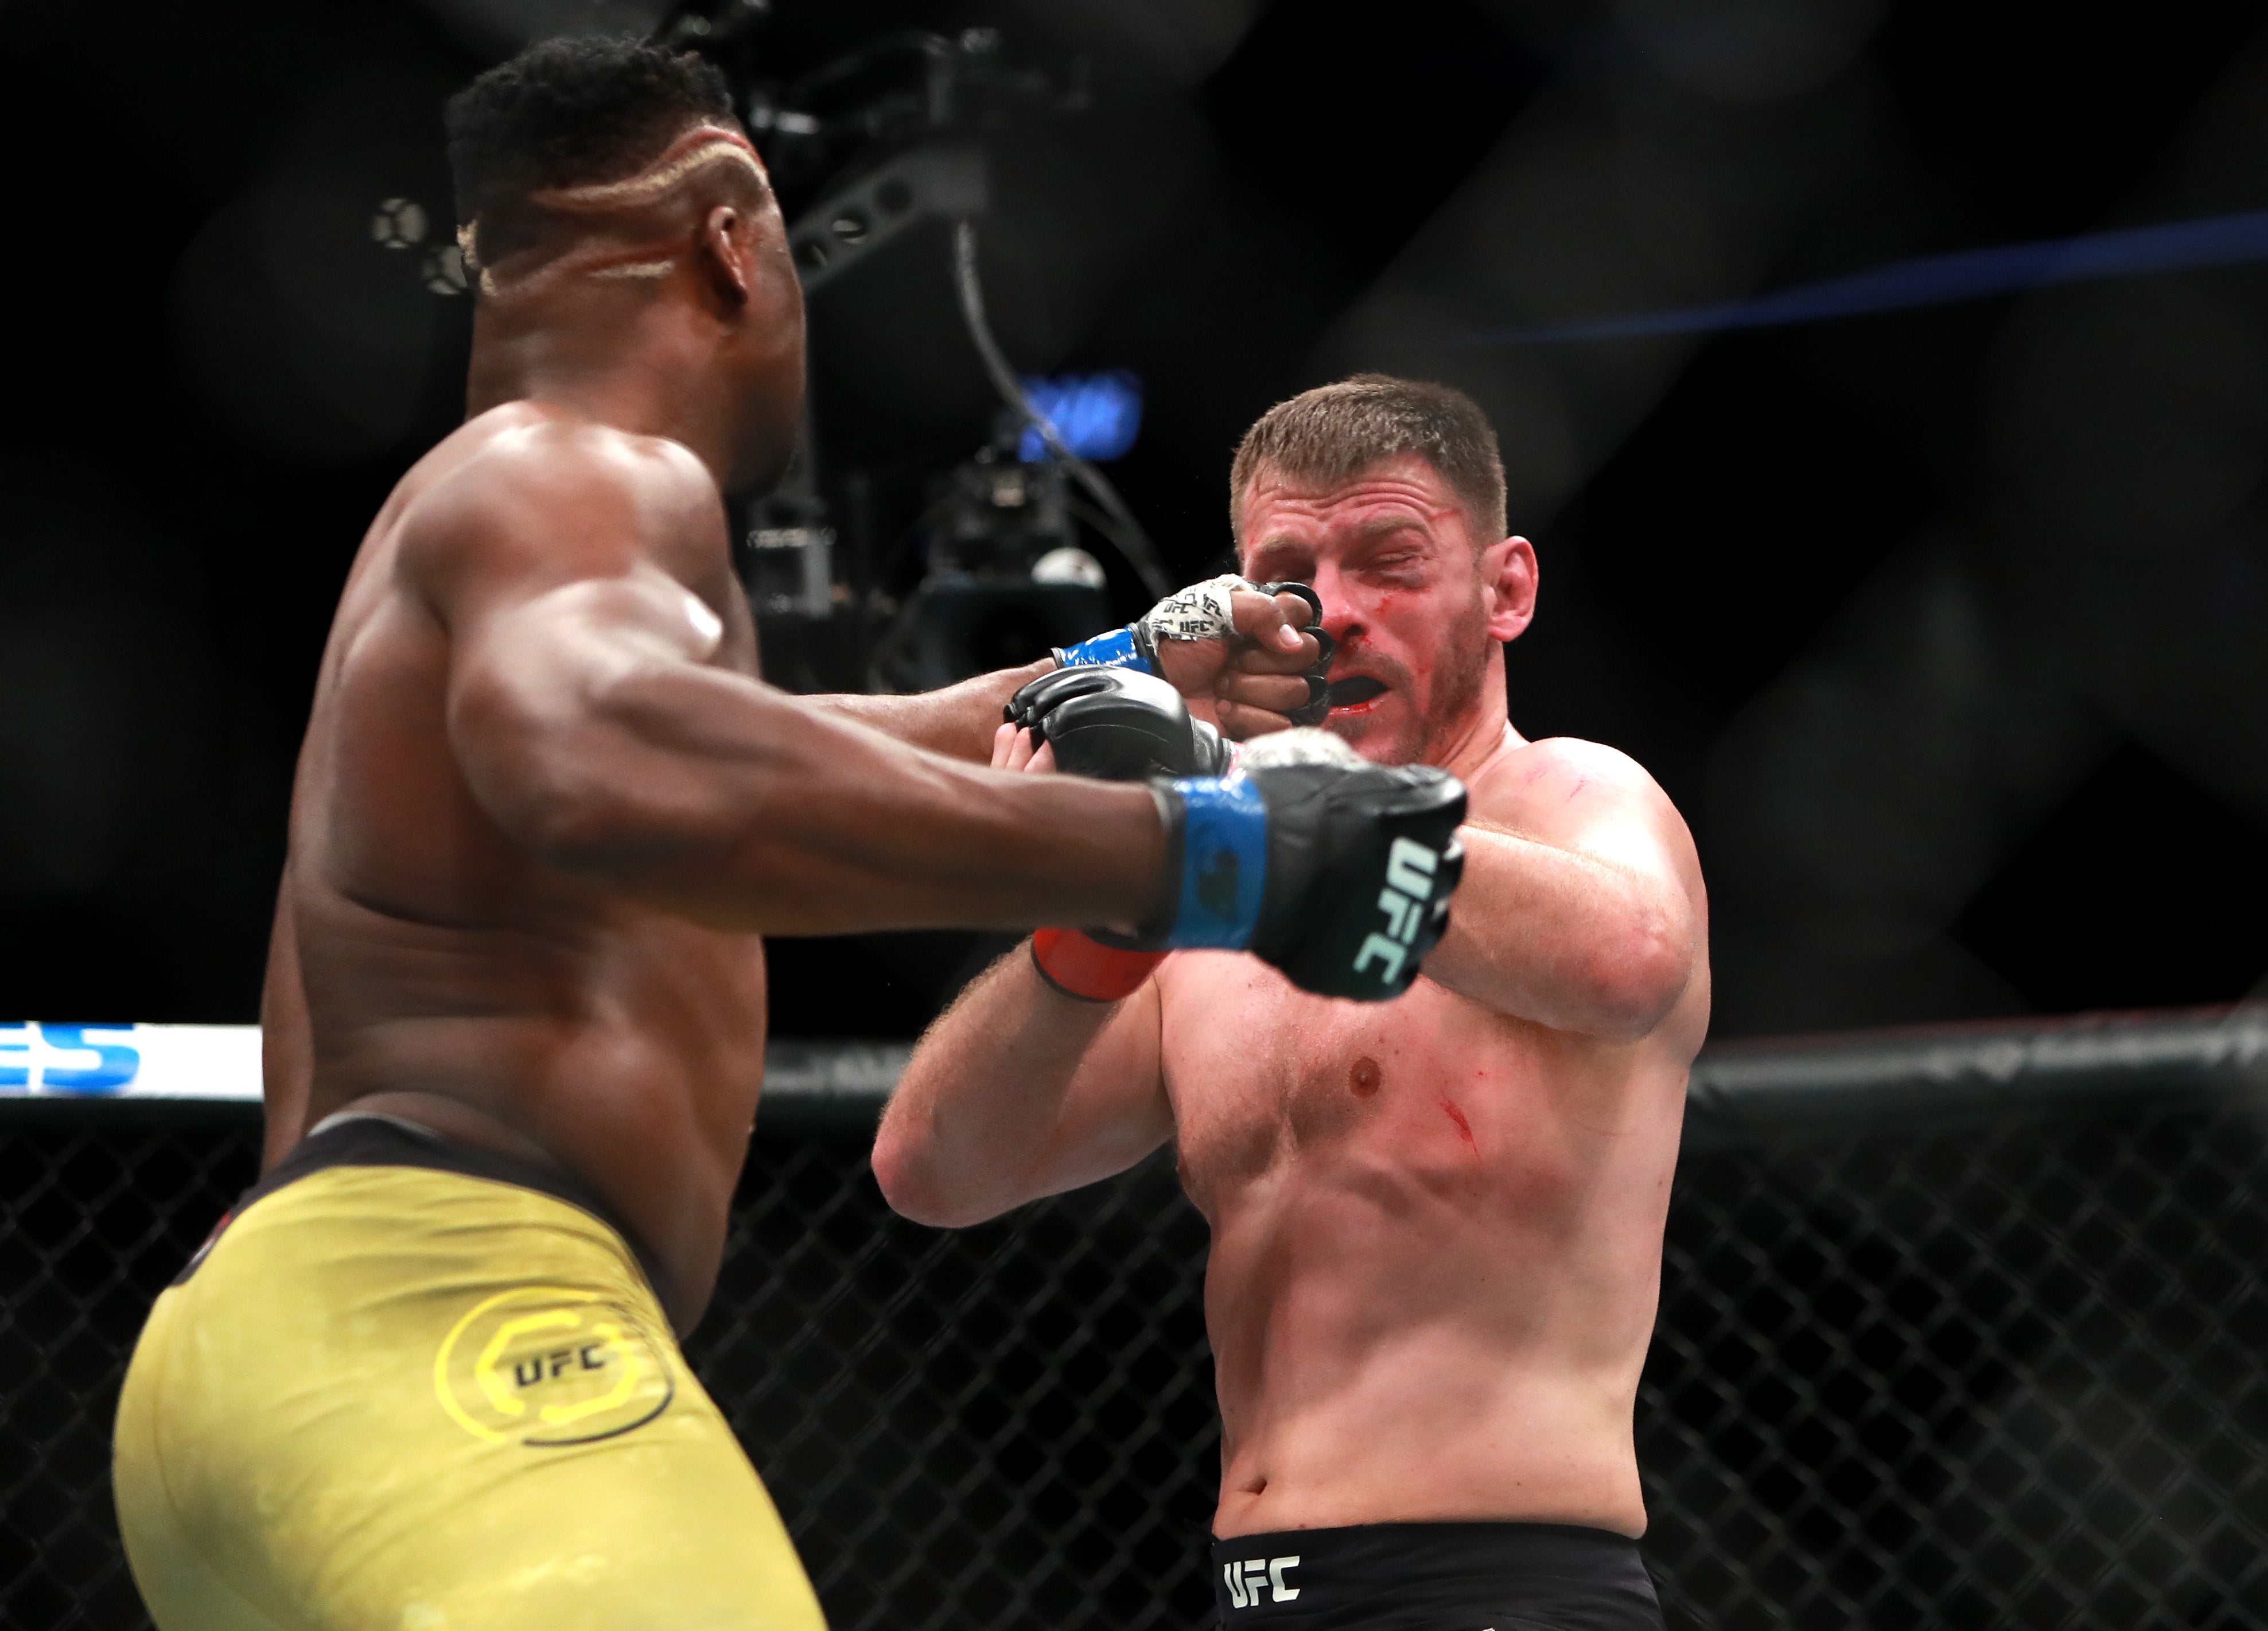 Miocic survived some powerful strikes from Ngannou in the pair’s first meeting